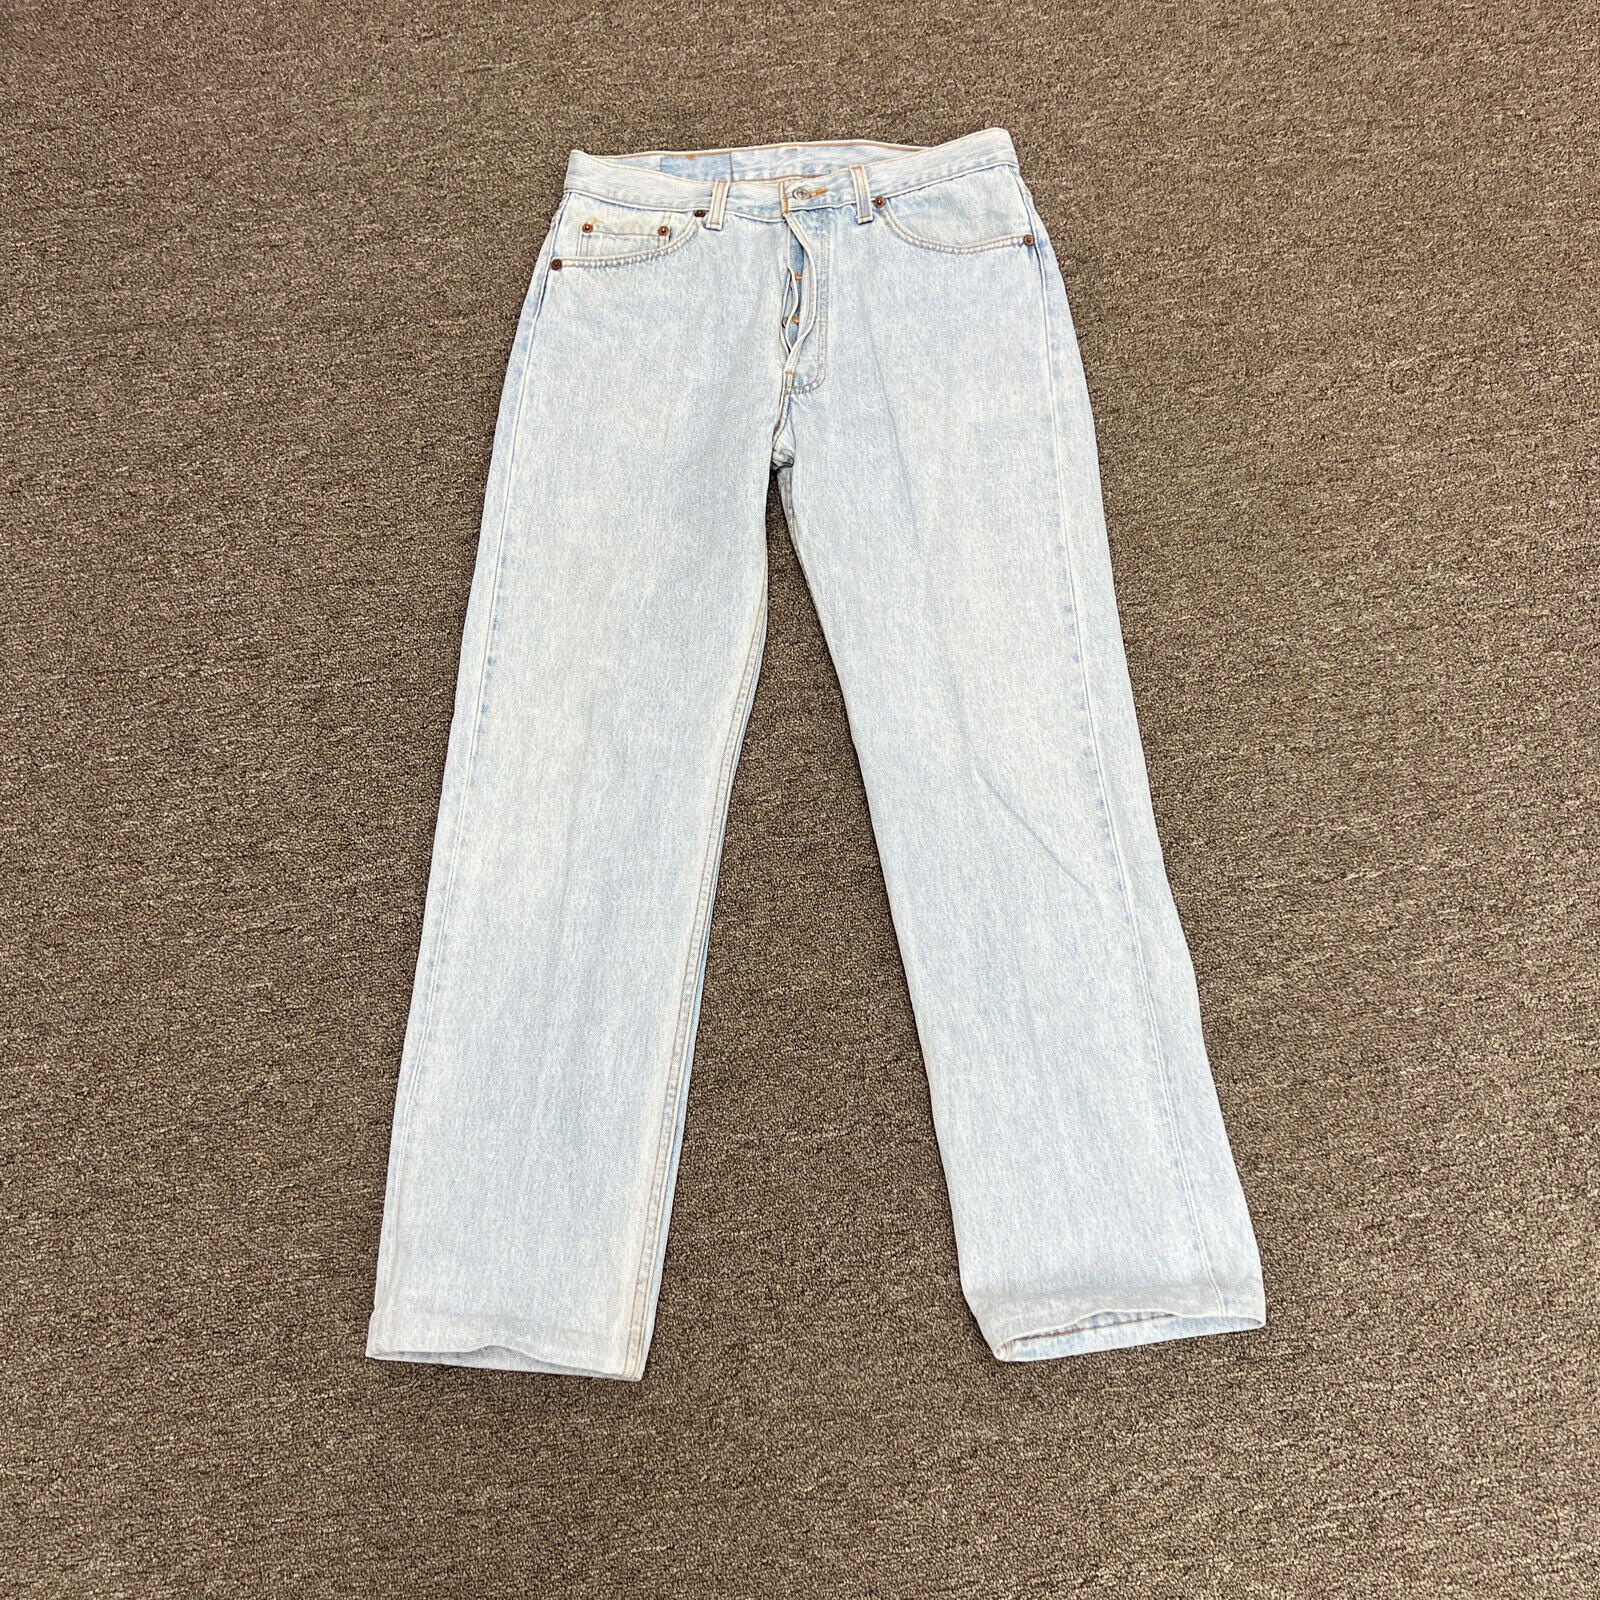 Vintage 90s Levi's 501 Jeans USA Made Size 34 X 30 From 1993